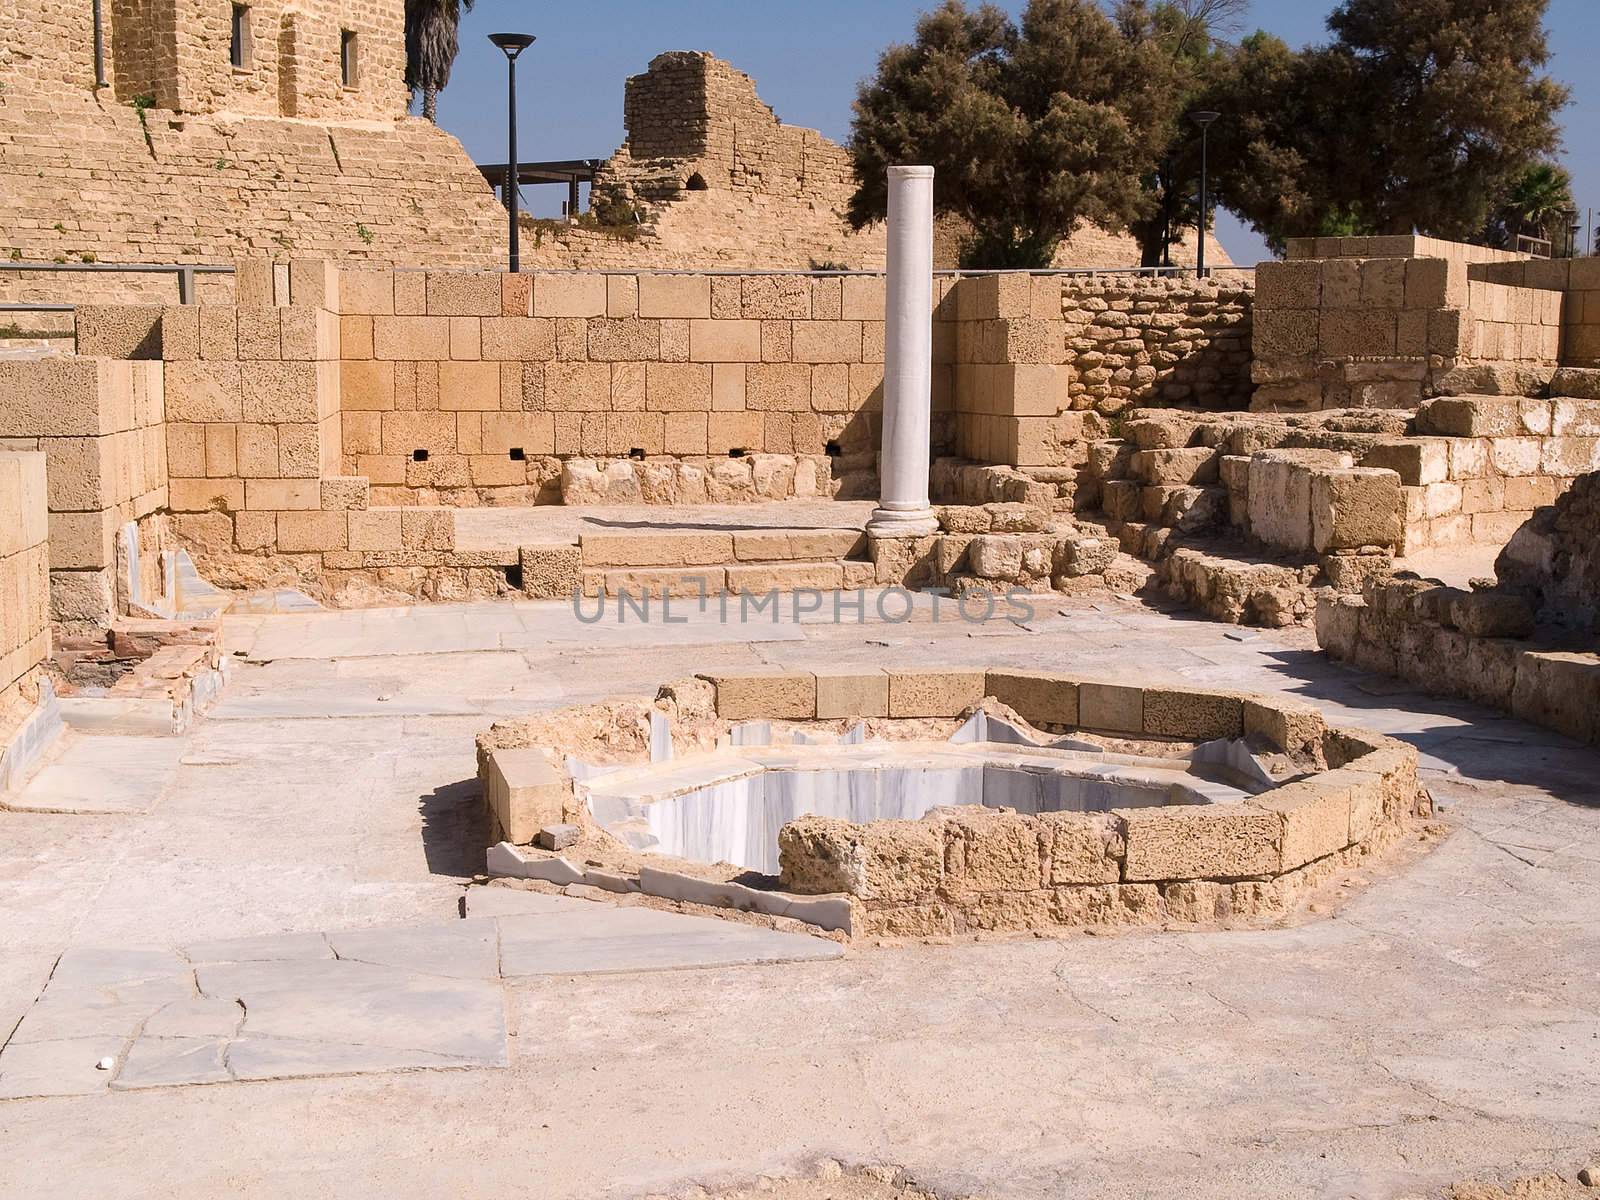 The old city of Caesarea Israe details of a marble public hot bath